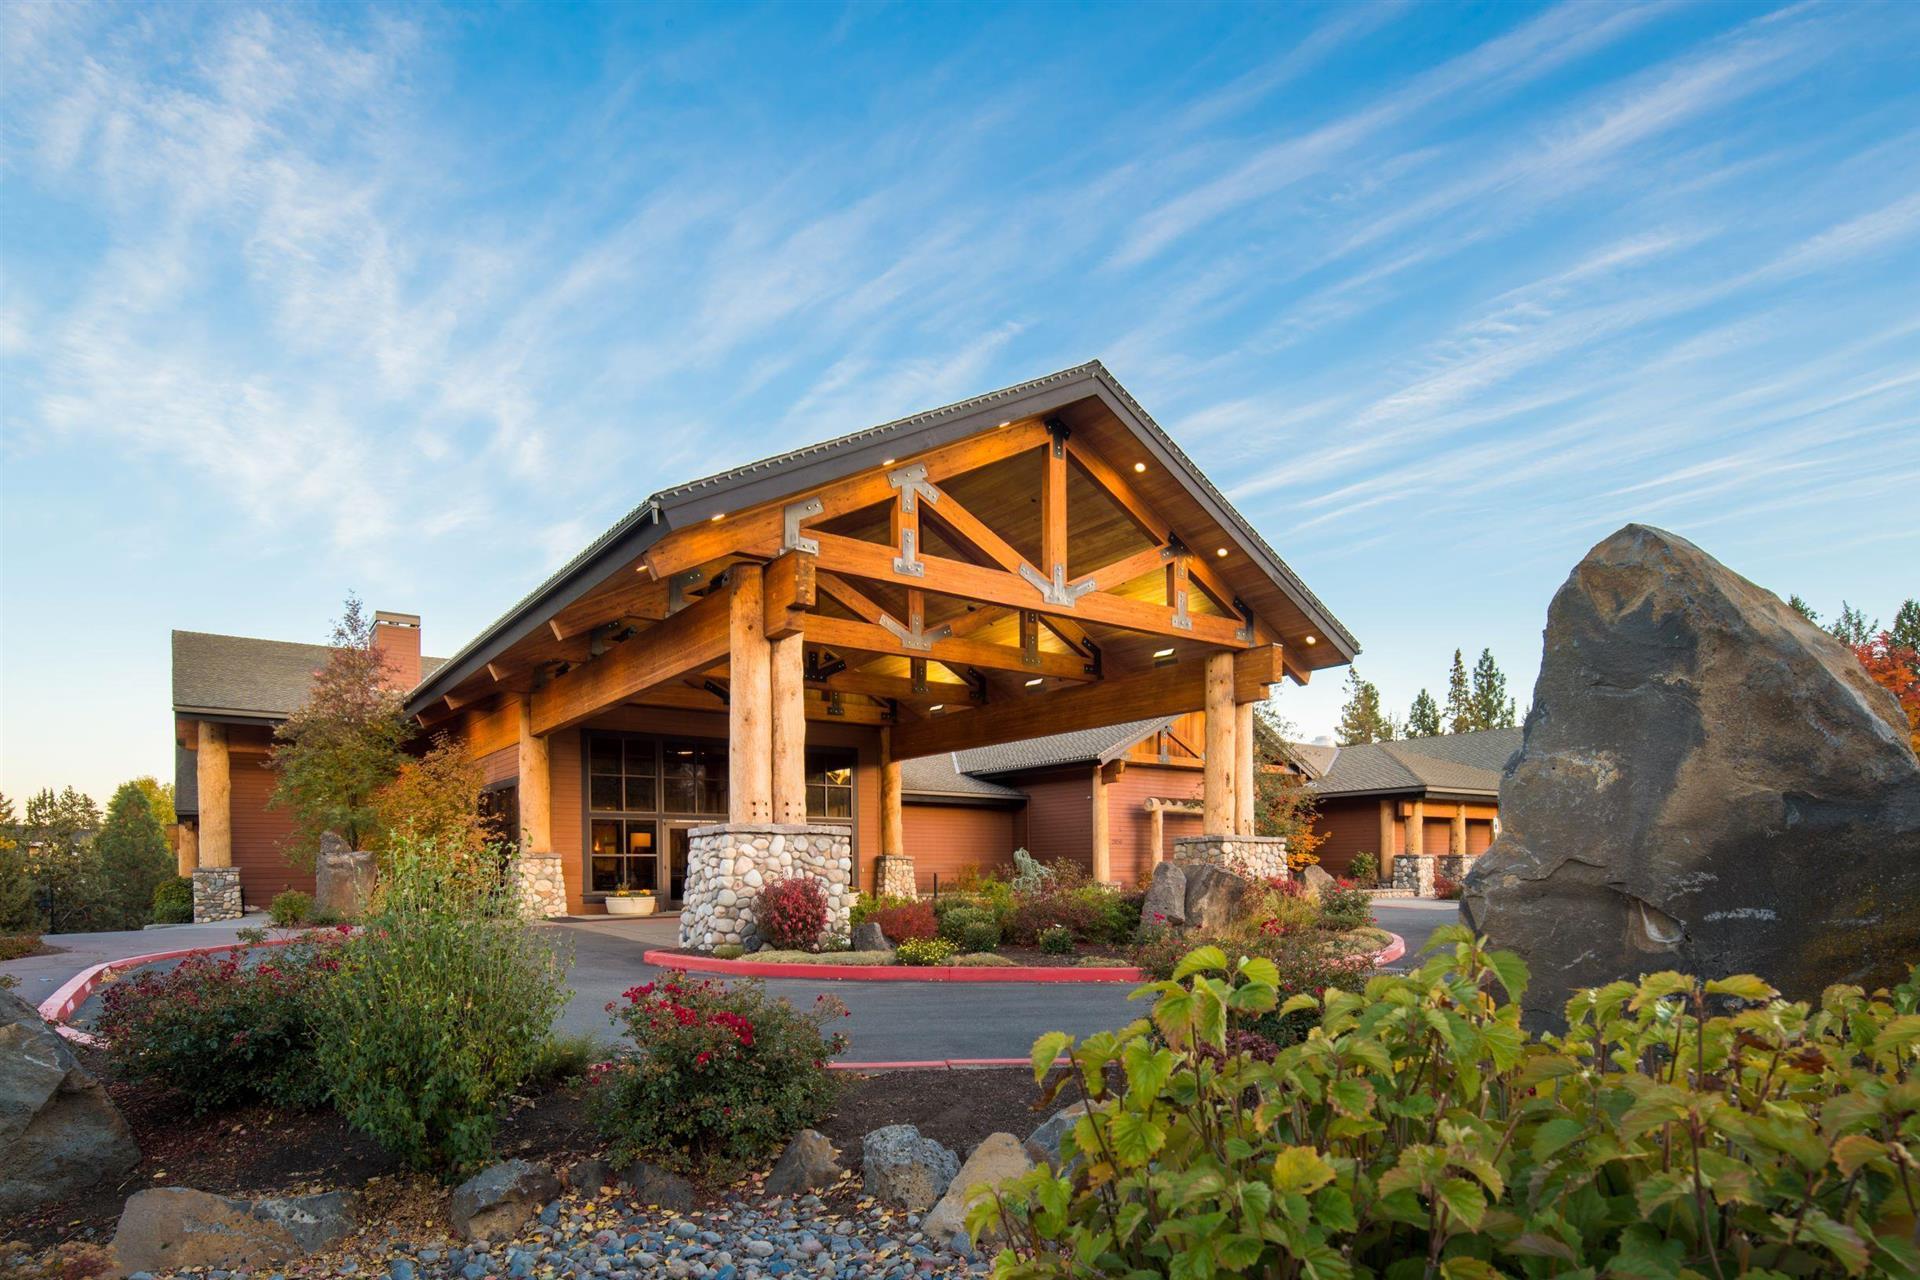 The Riverhouse Lodge in Bend, OR